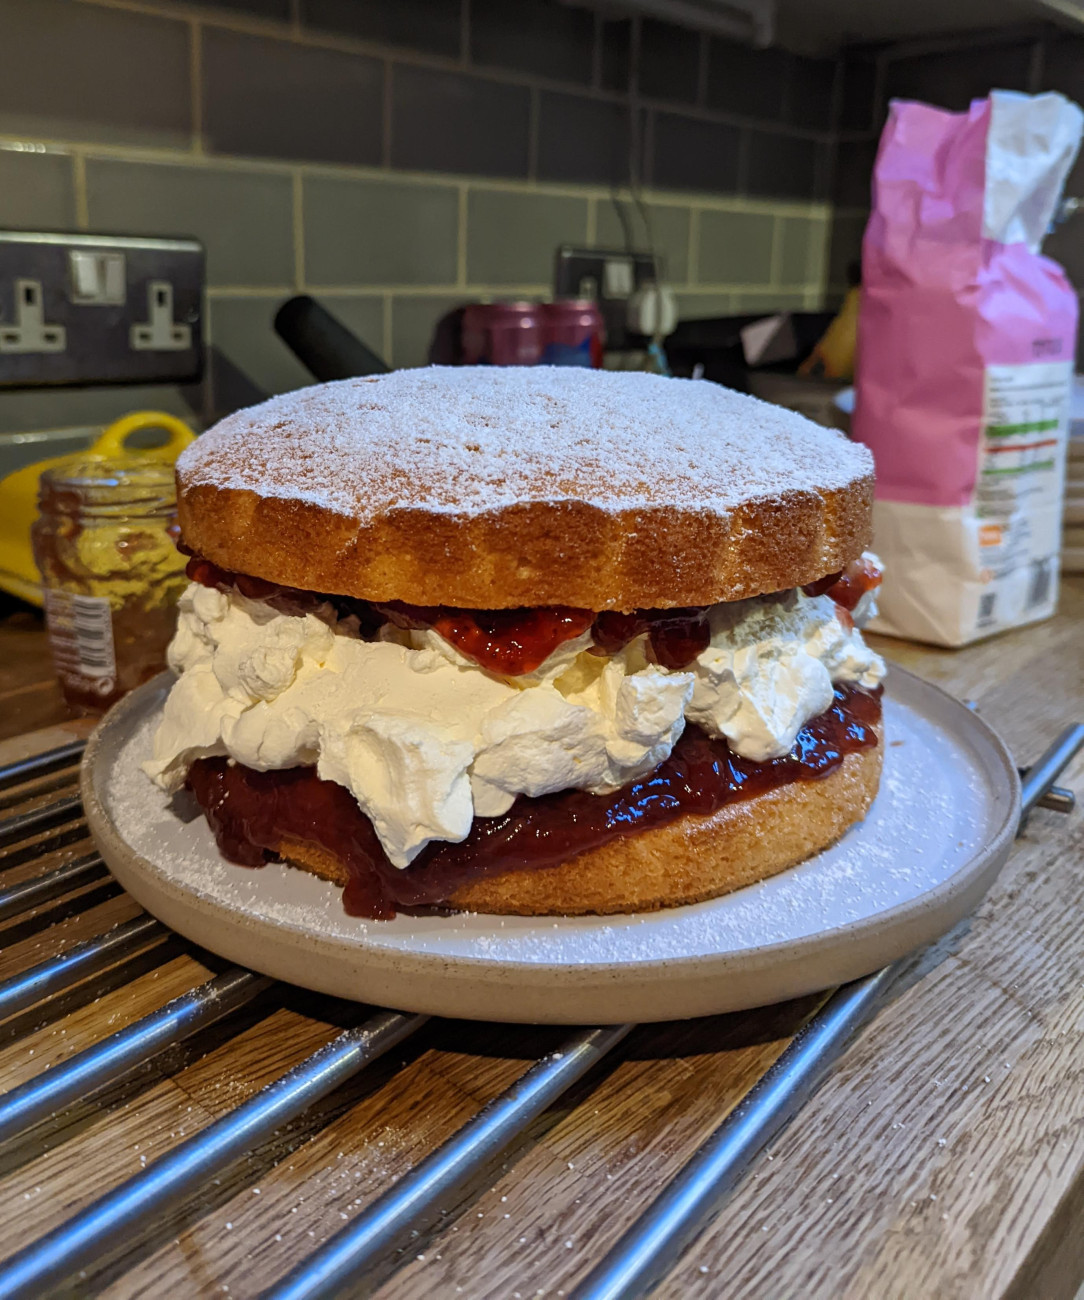 A Victoria sponge with an appropriate amount of cream